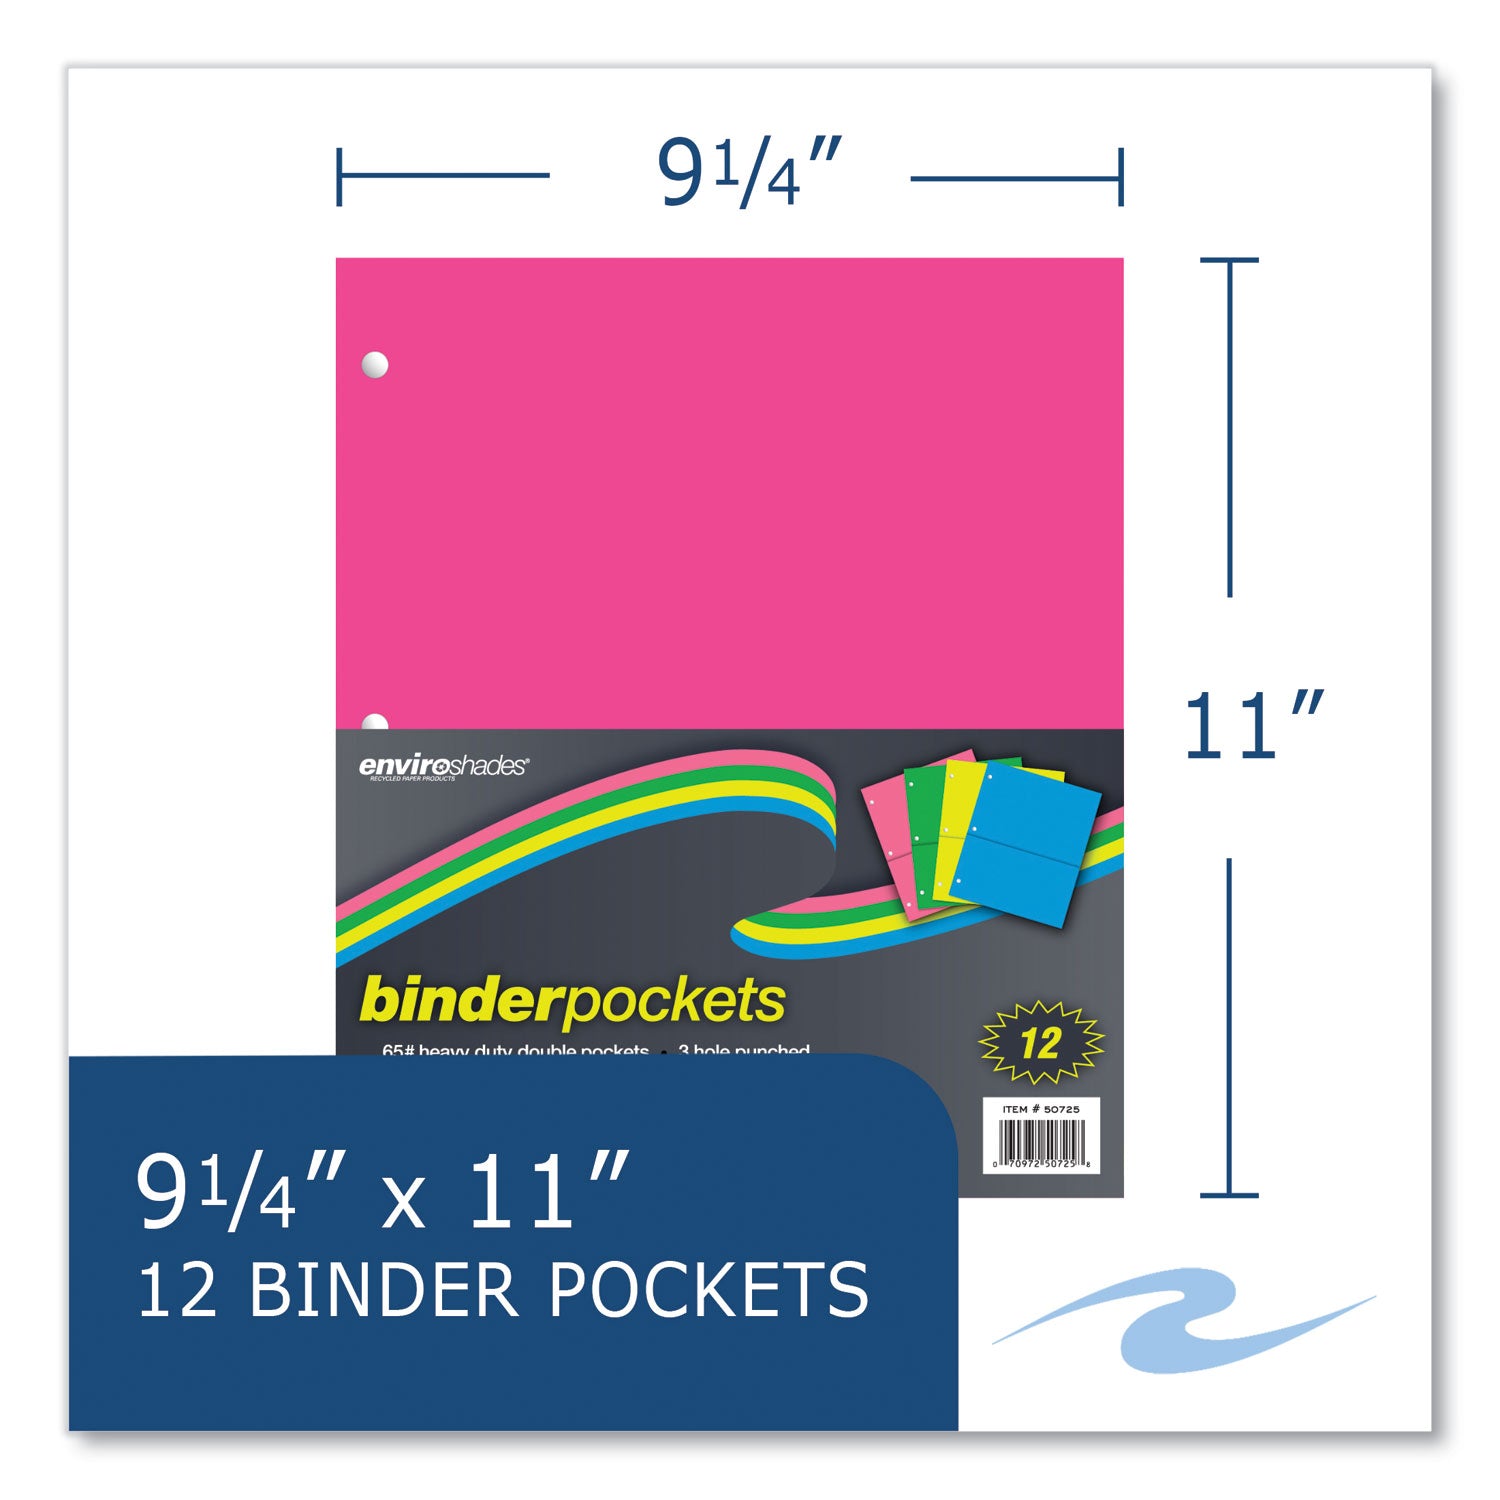 binder-pocket-9-w-x-11-h-assorted-colors-144-carton-ships-in-4-6-business-days_roa50725cs - 2